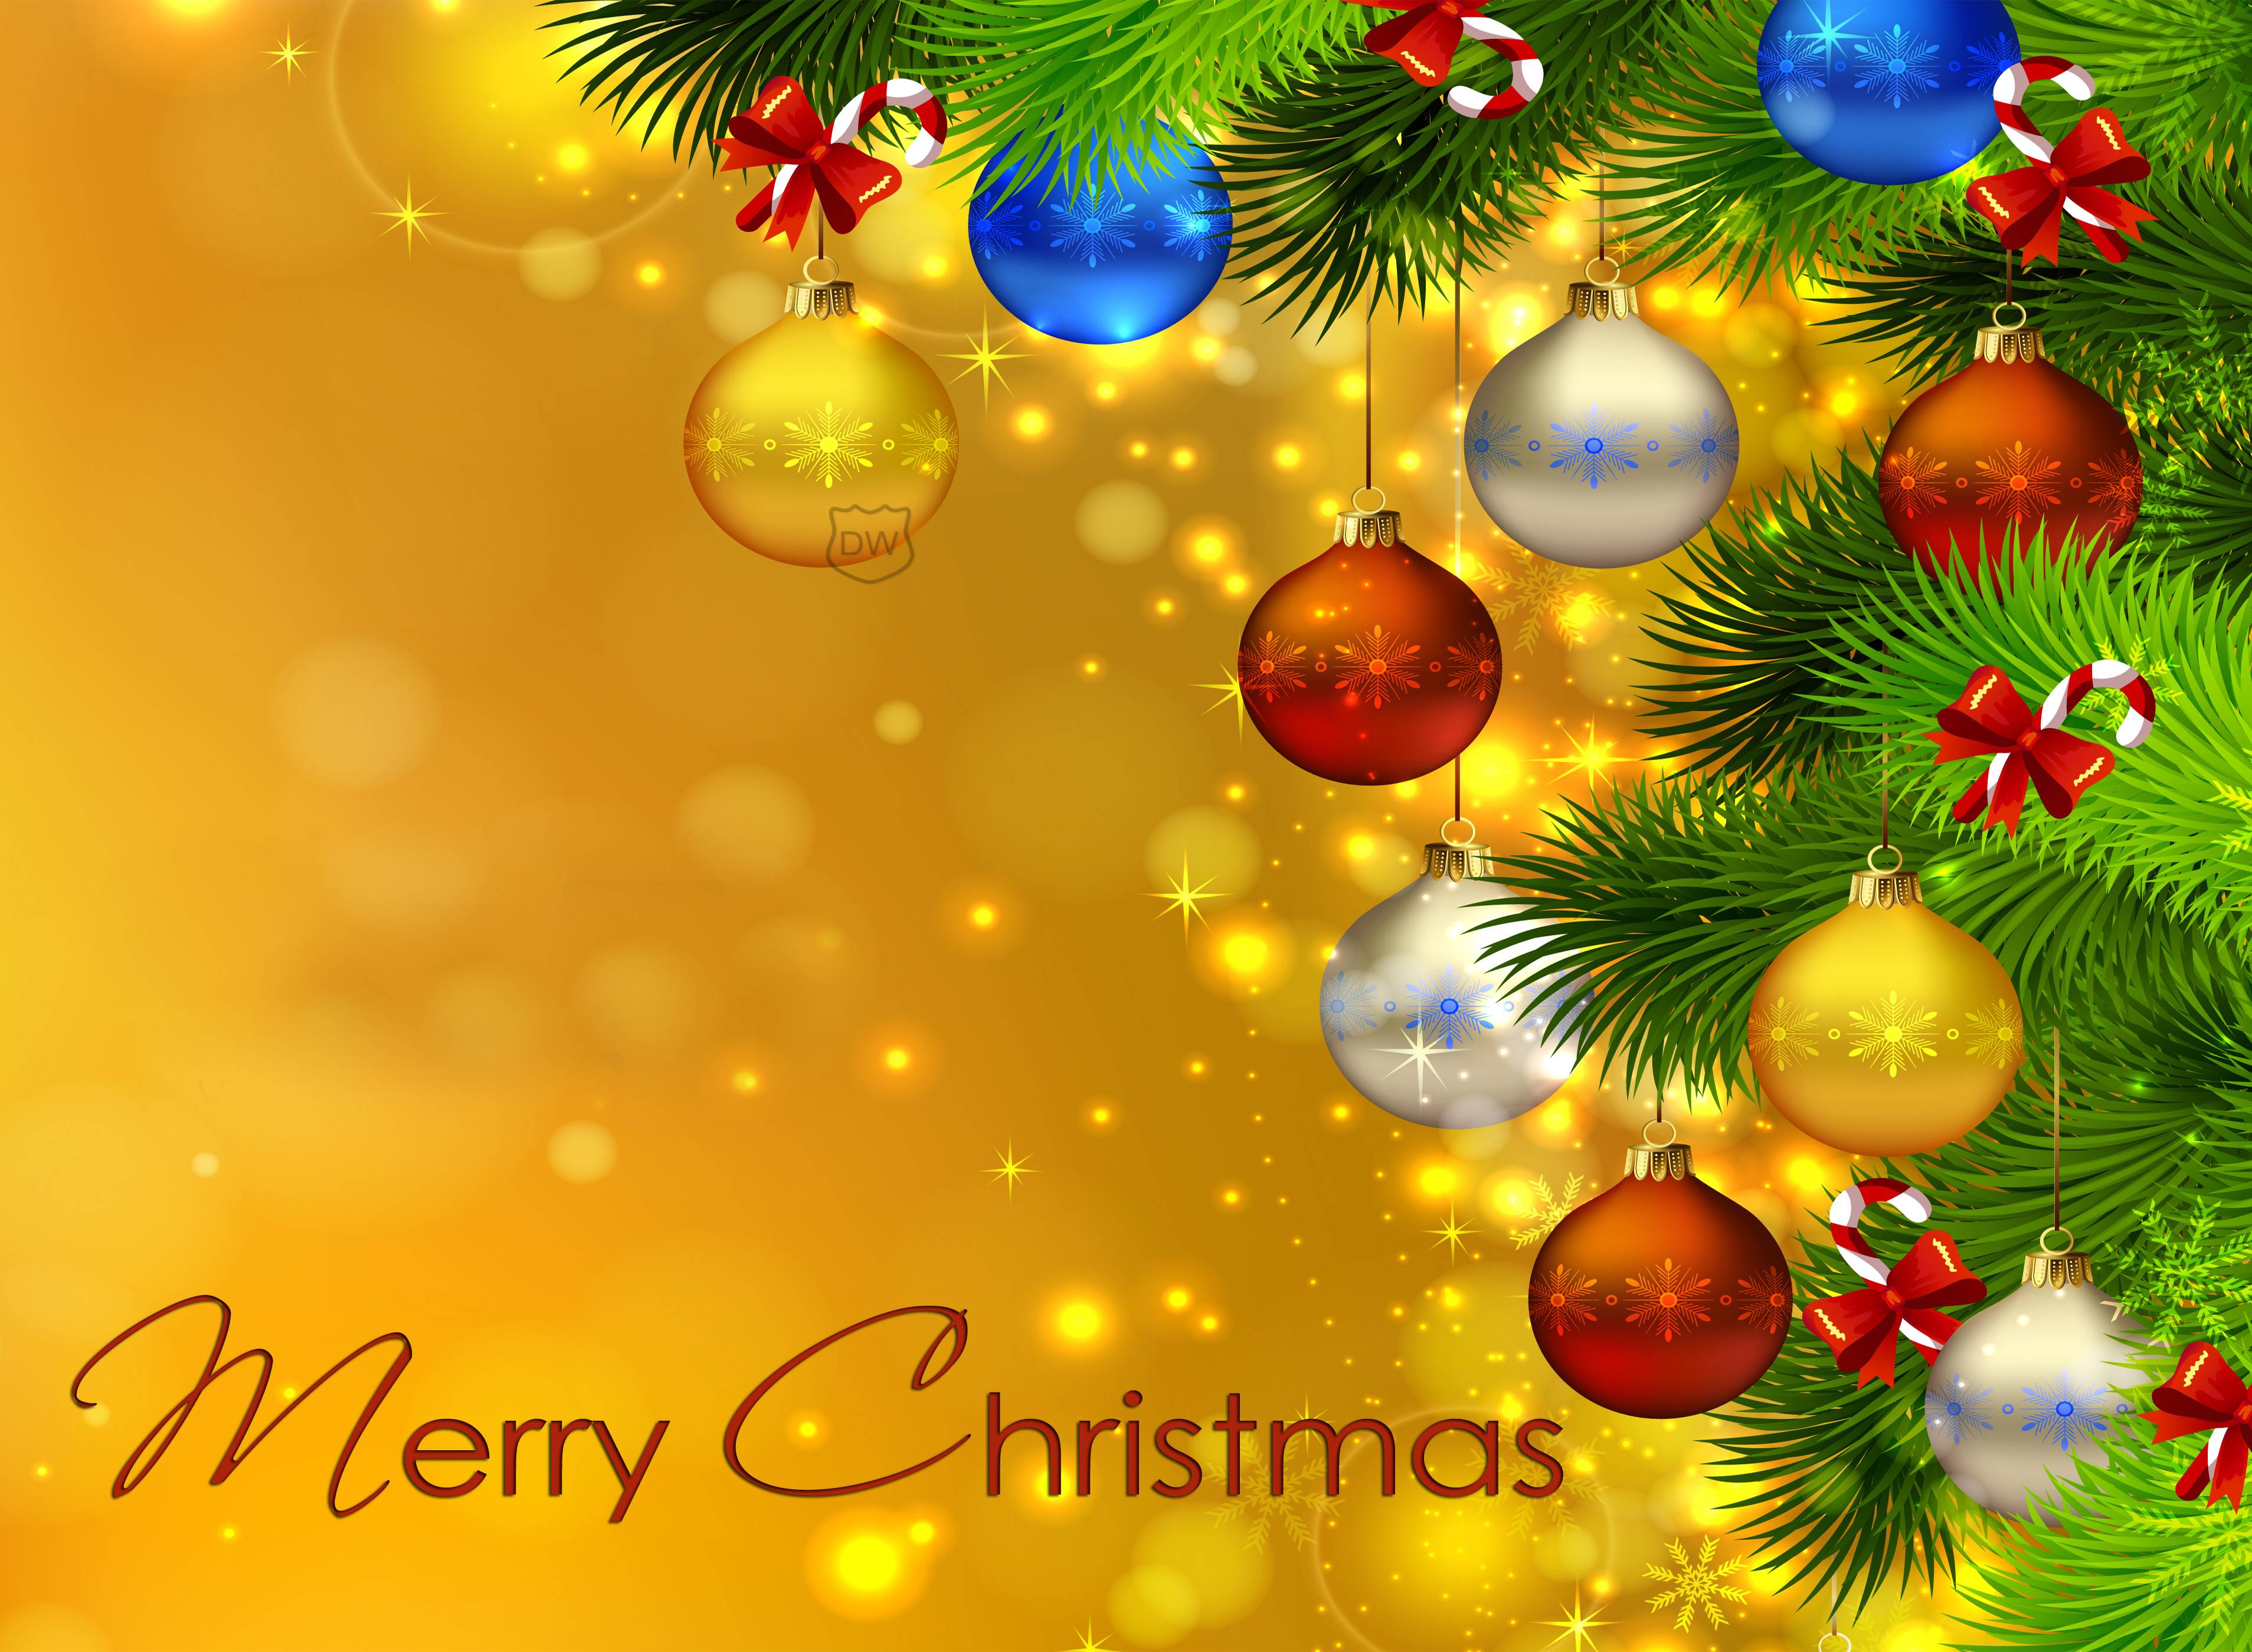 Merry Christmas Wallpapers Hd Free Download - Happy Christmas Images Hd -  3816x2800 Wallpaper 